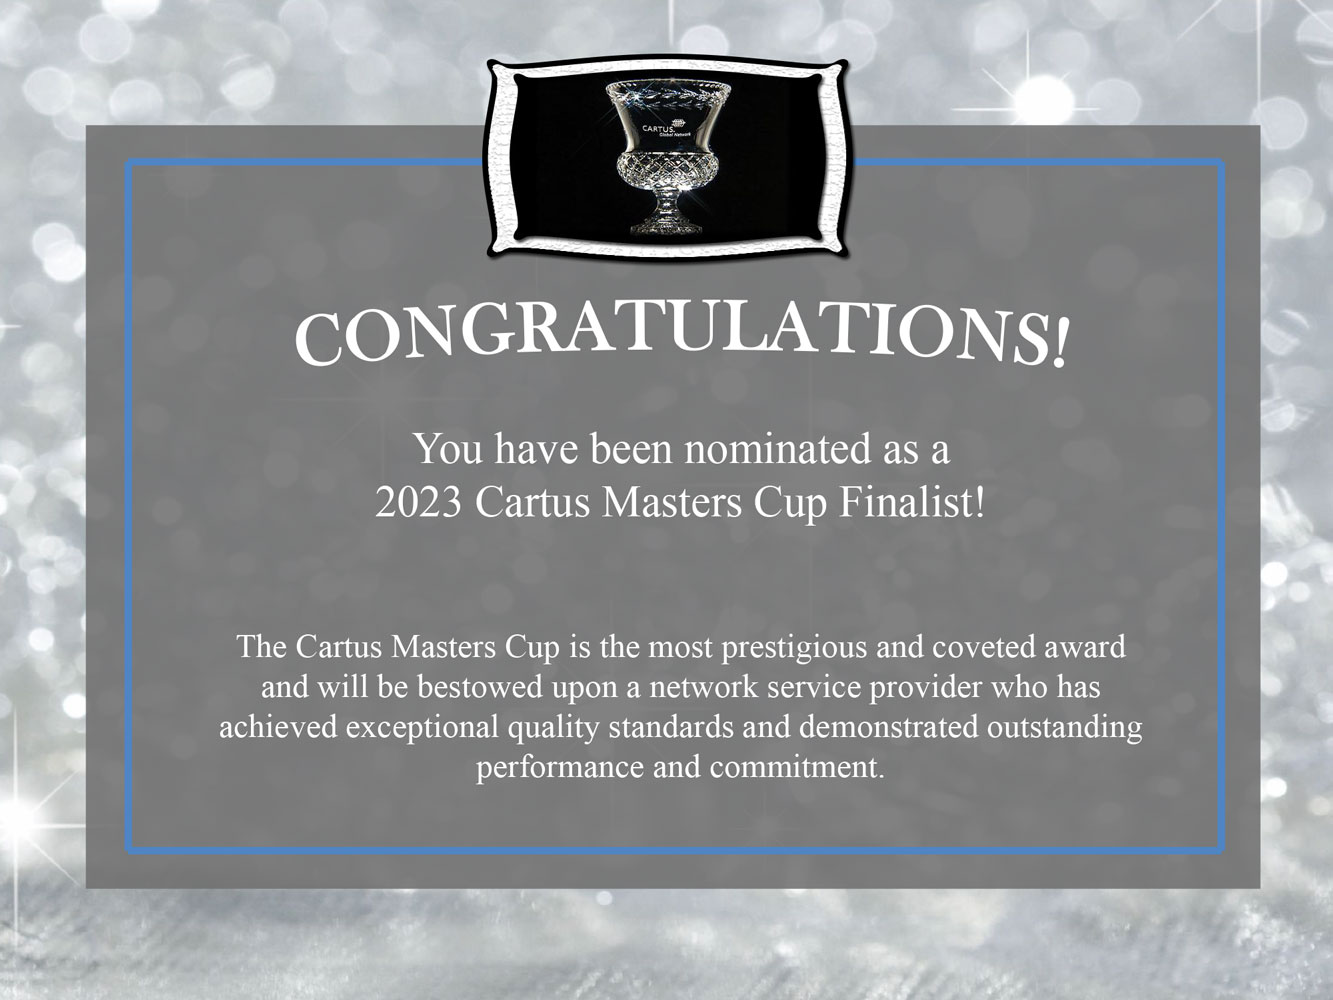 New World Van Lines is Nominated for a Prestigious Cartus Masters Cup Award at the 2023 Global Network Conference